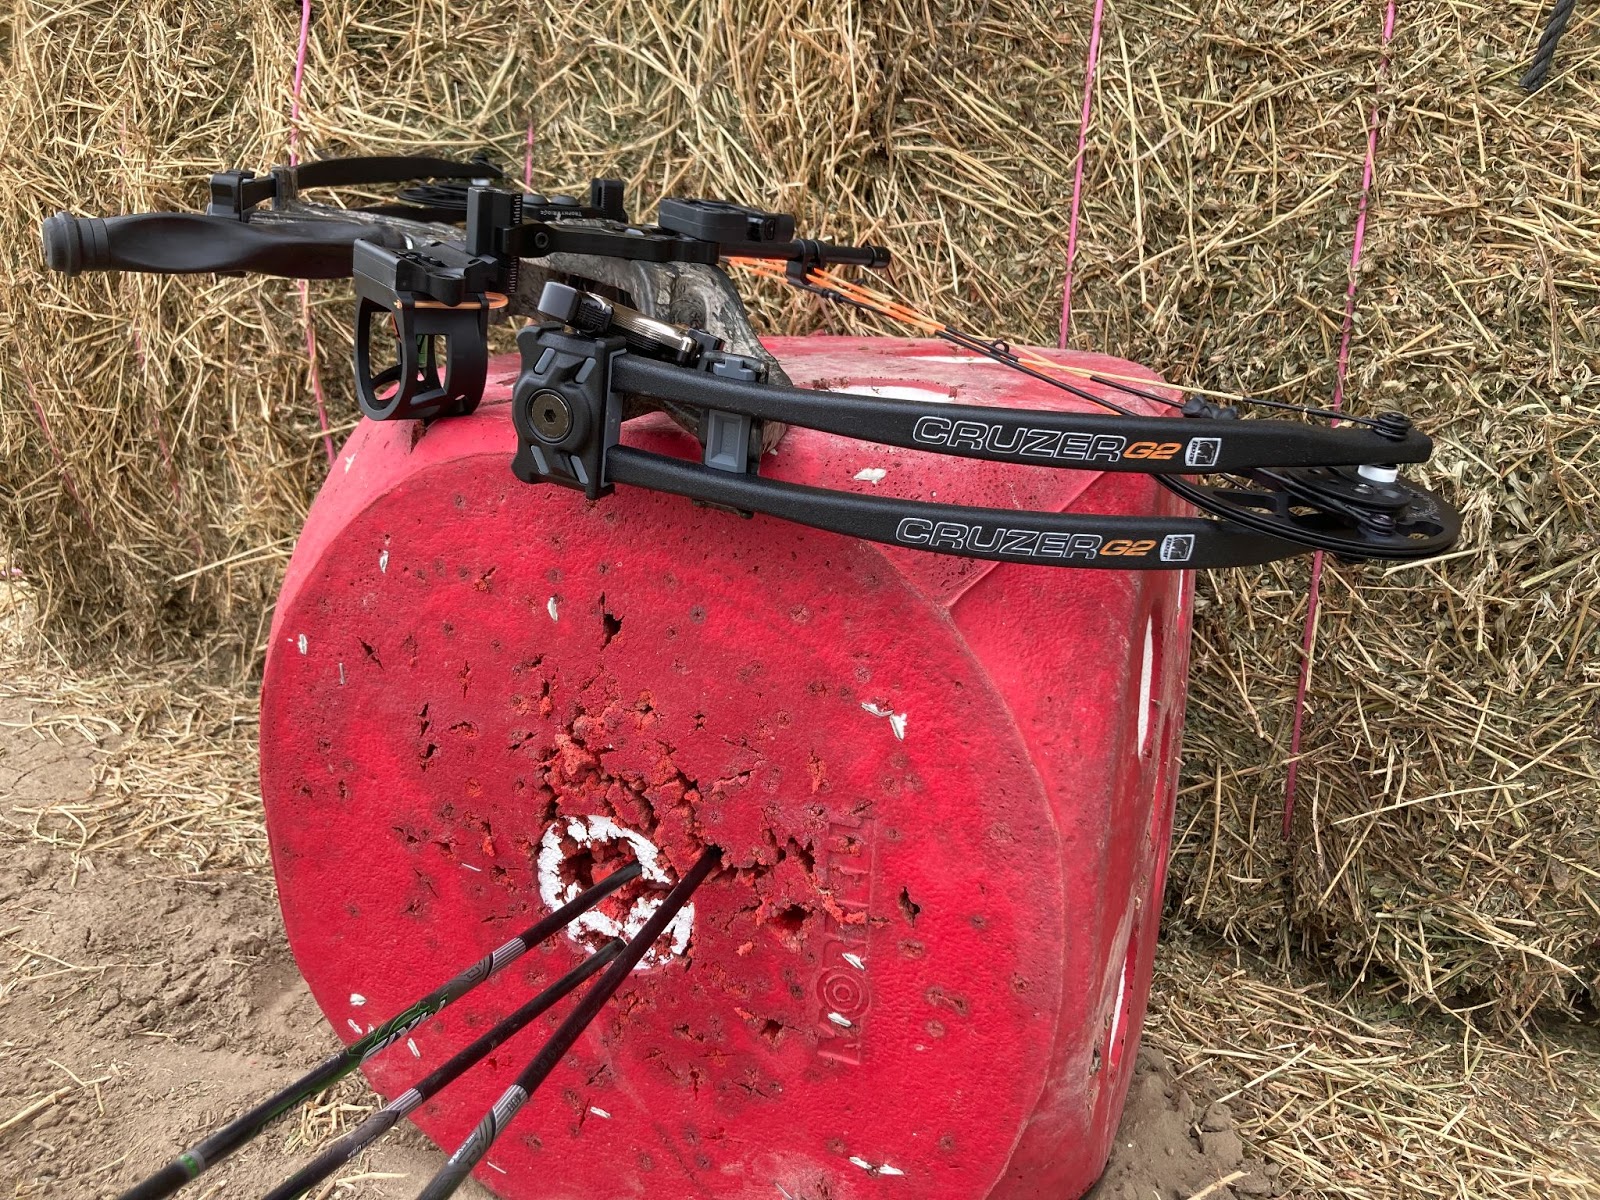 Bear Cruzer G2 on target with arrows in it